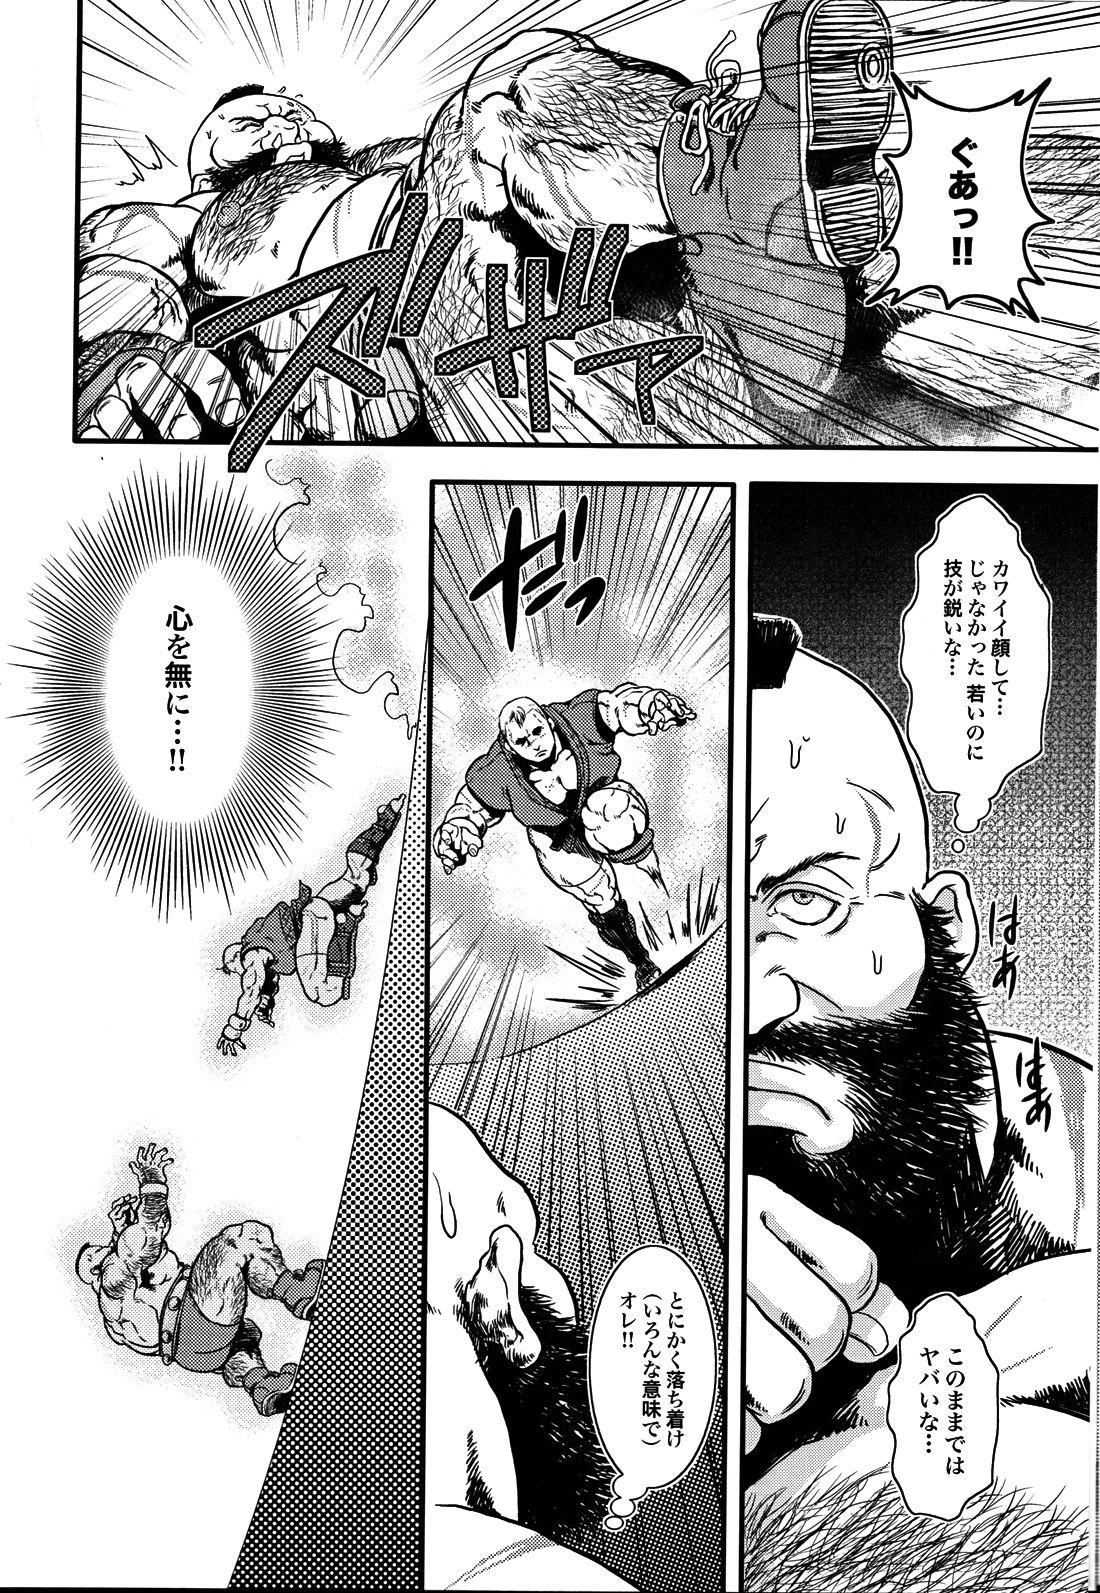 Class Room Sweetest Memories - Street fighter Public Fuck - Page 6